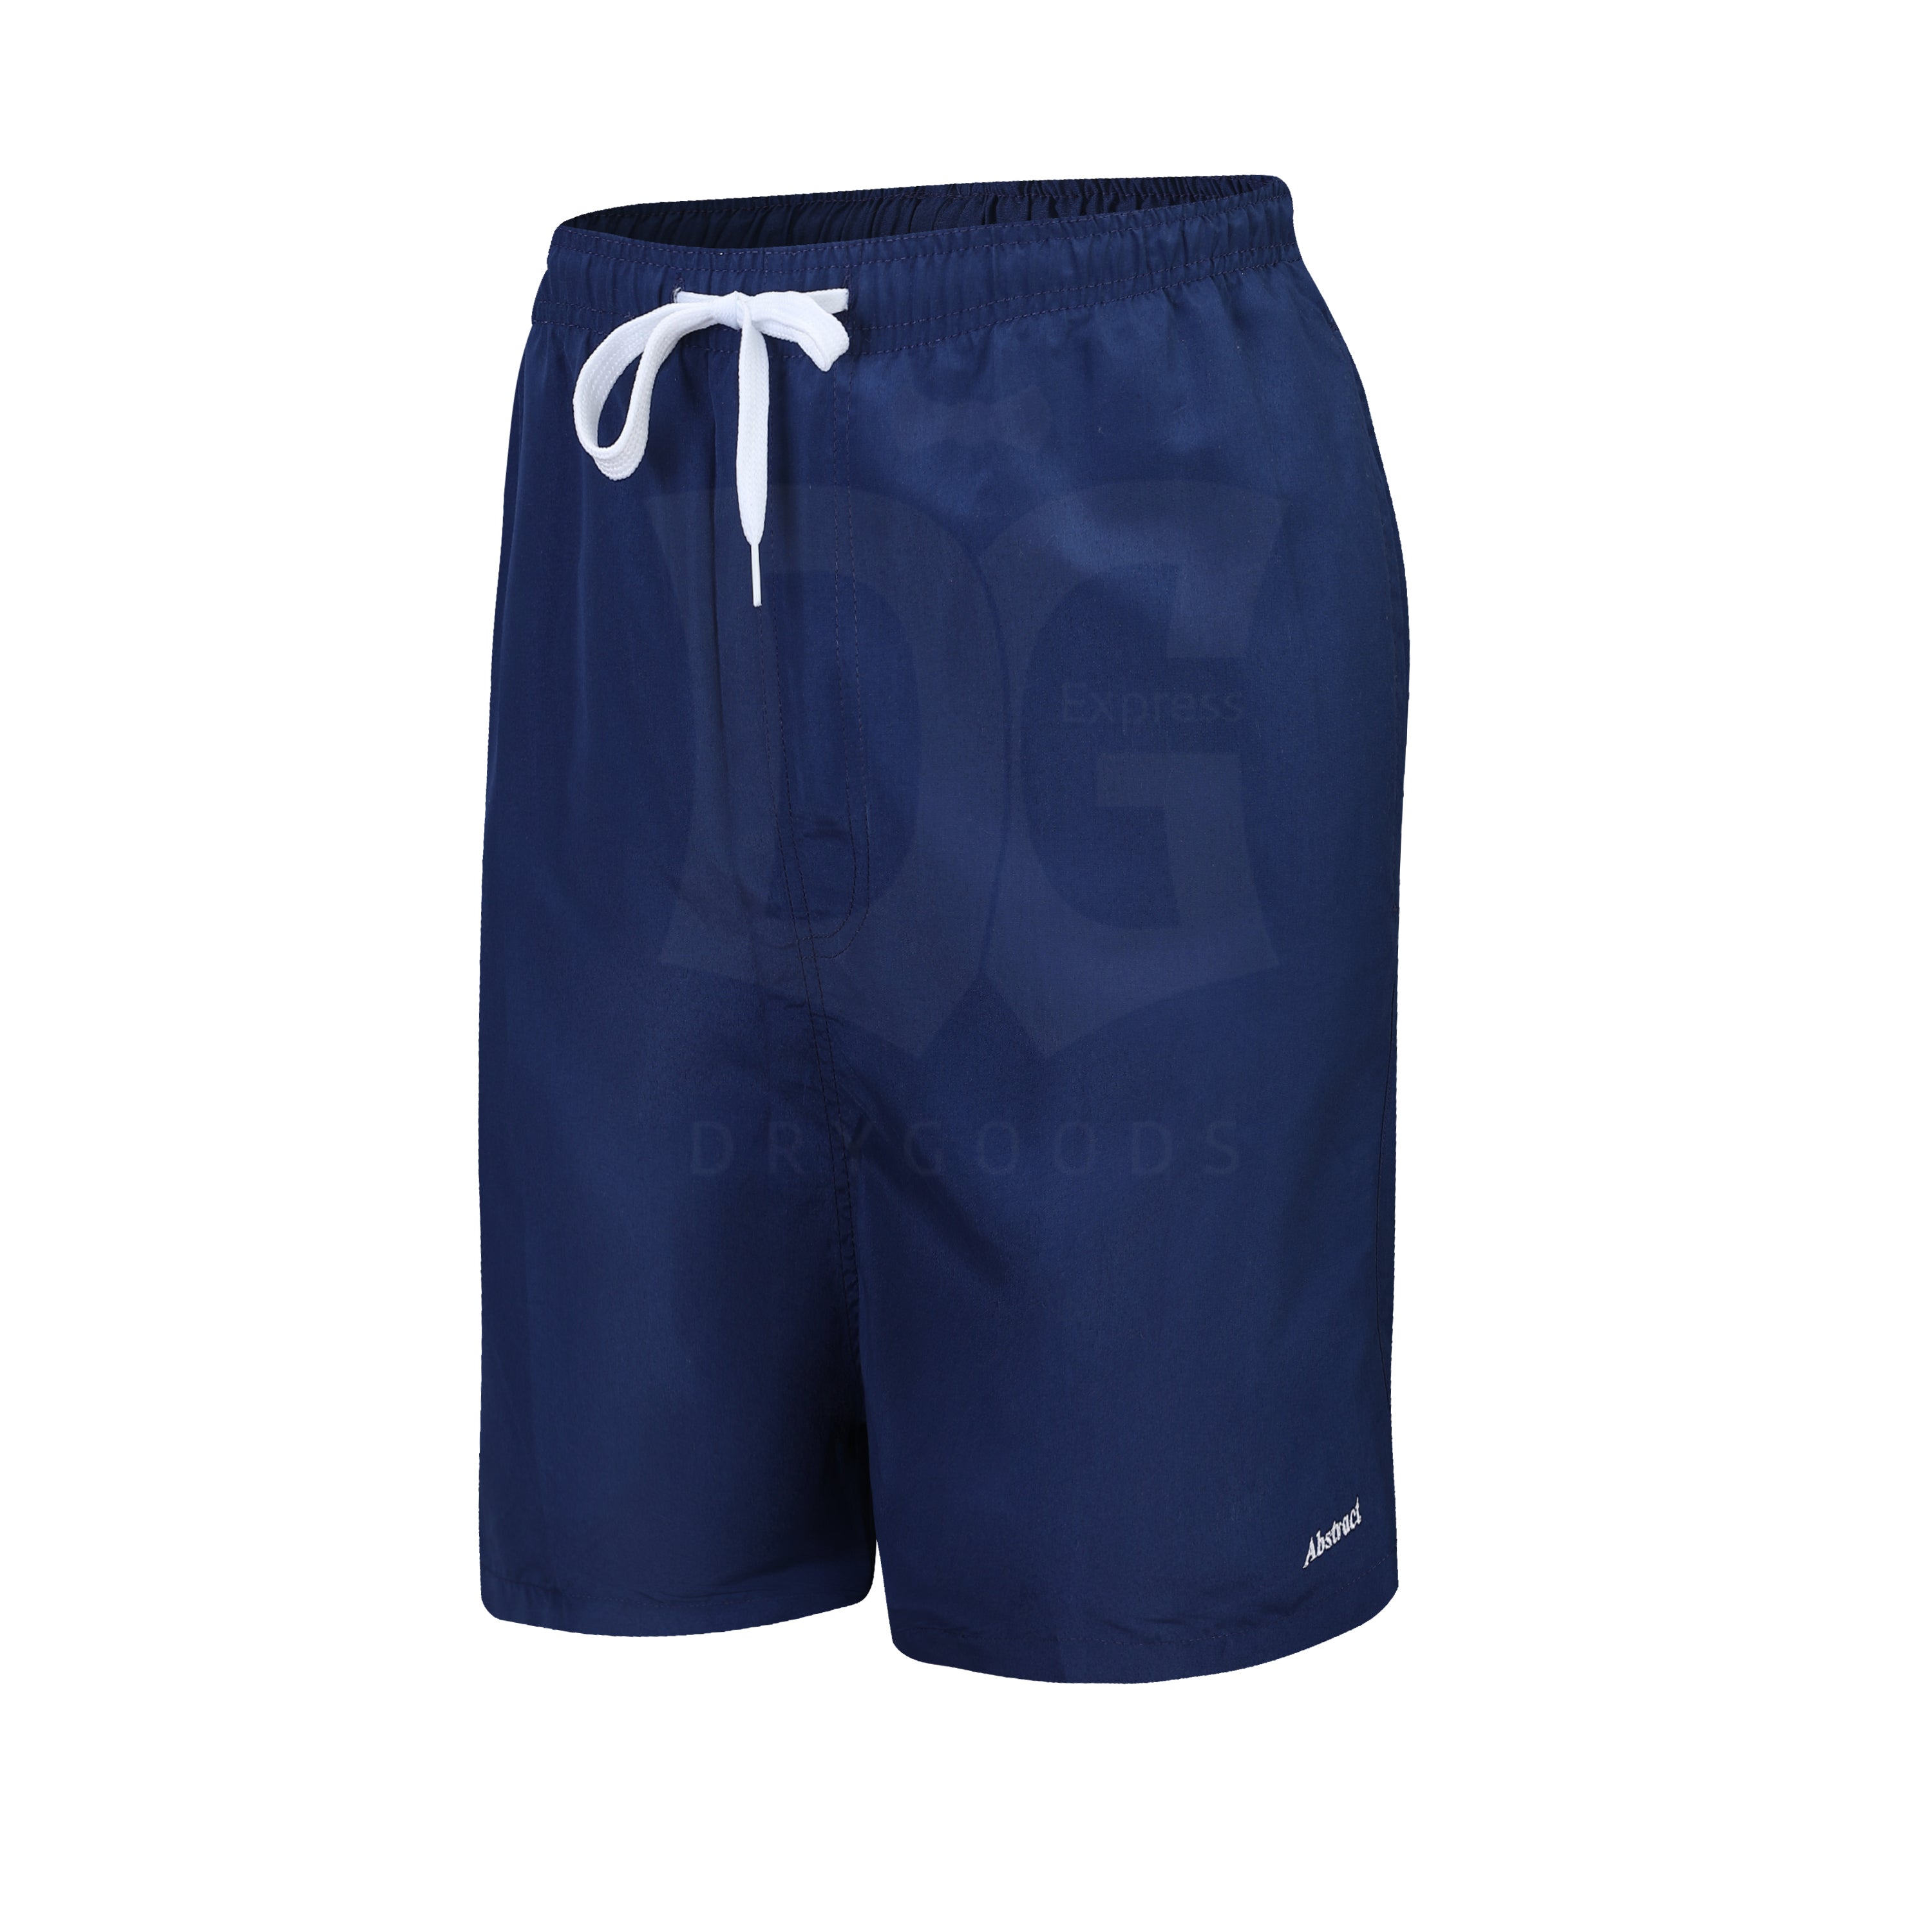 Abstract Men's Navy Bathing Suits